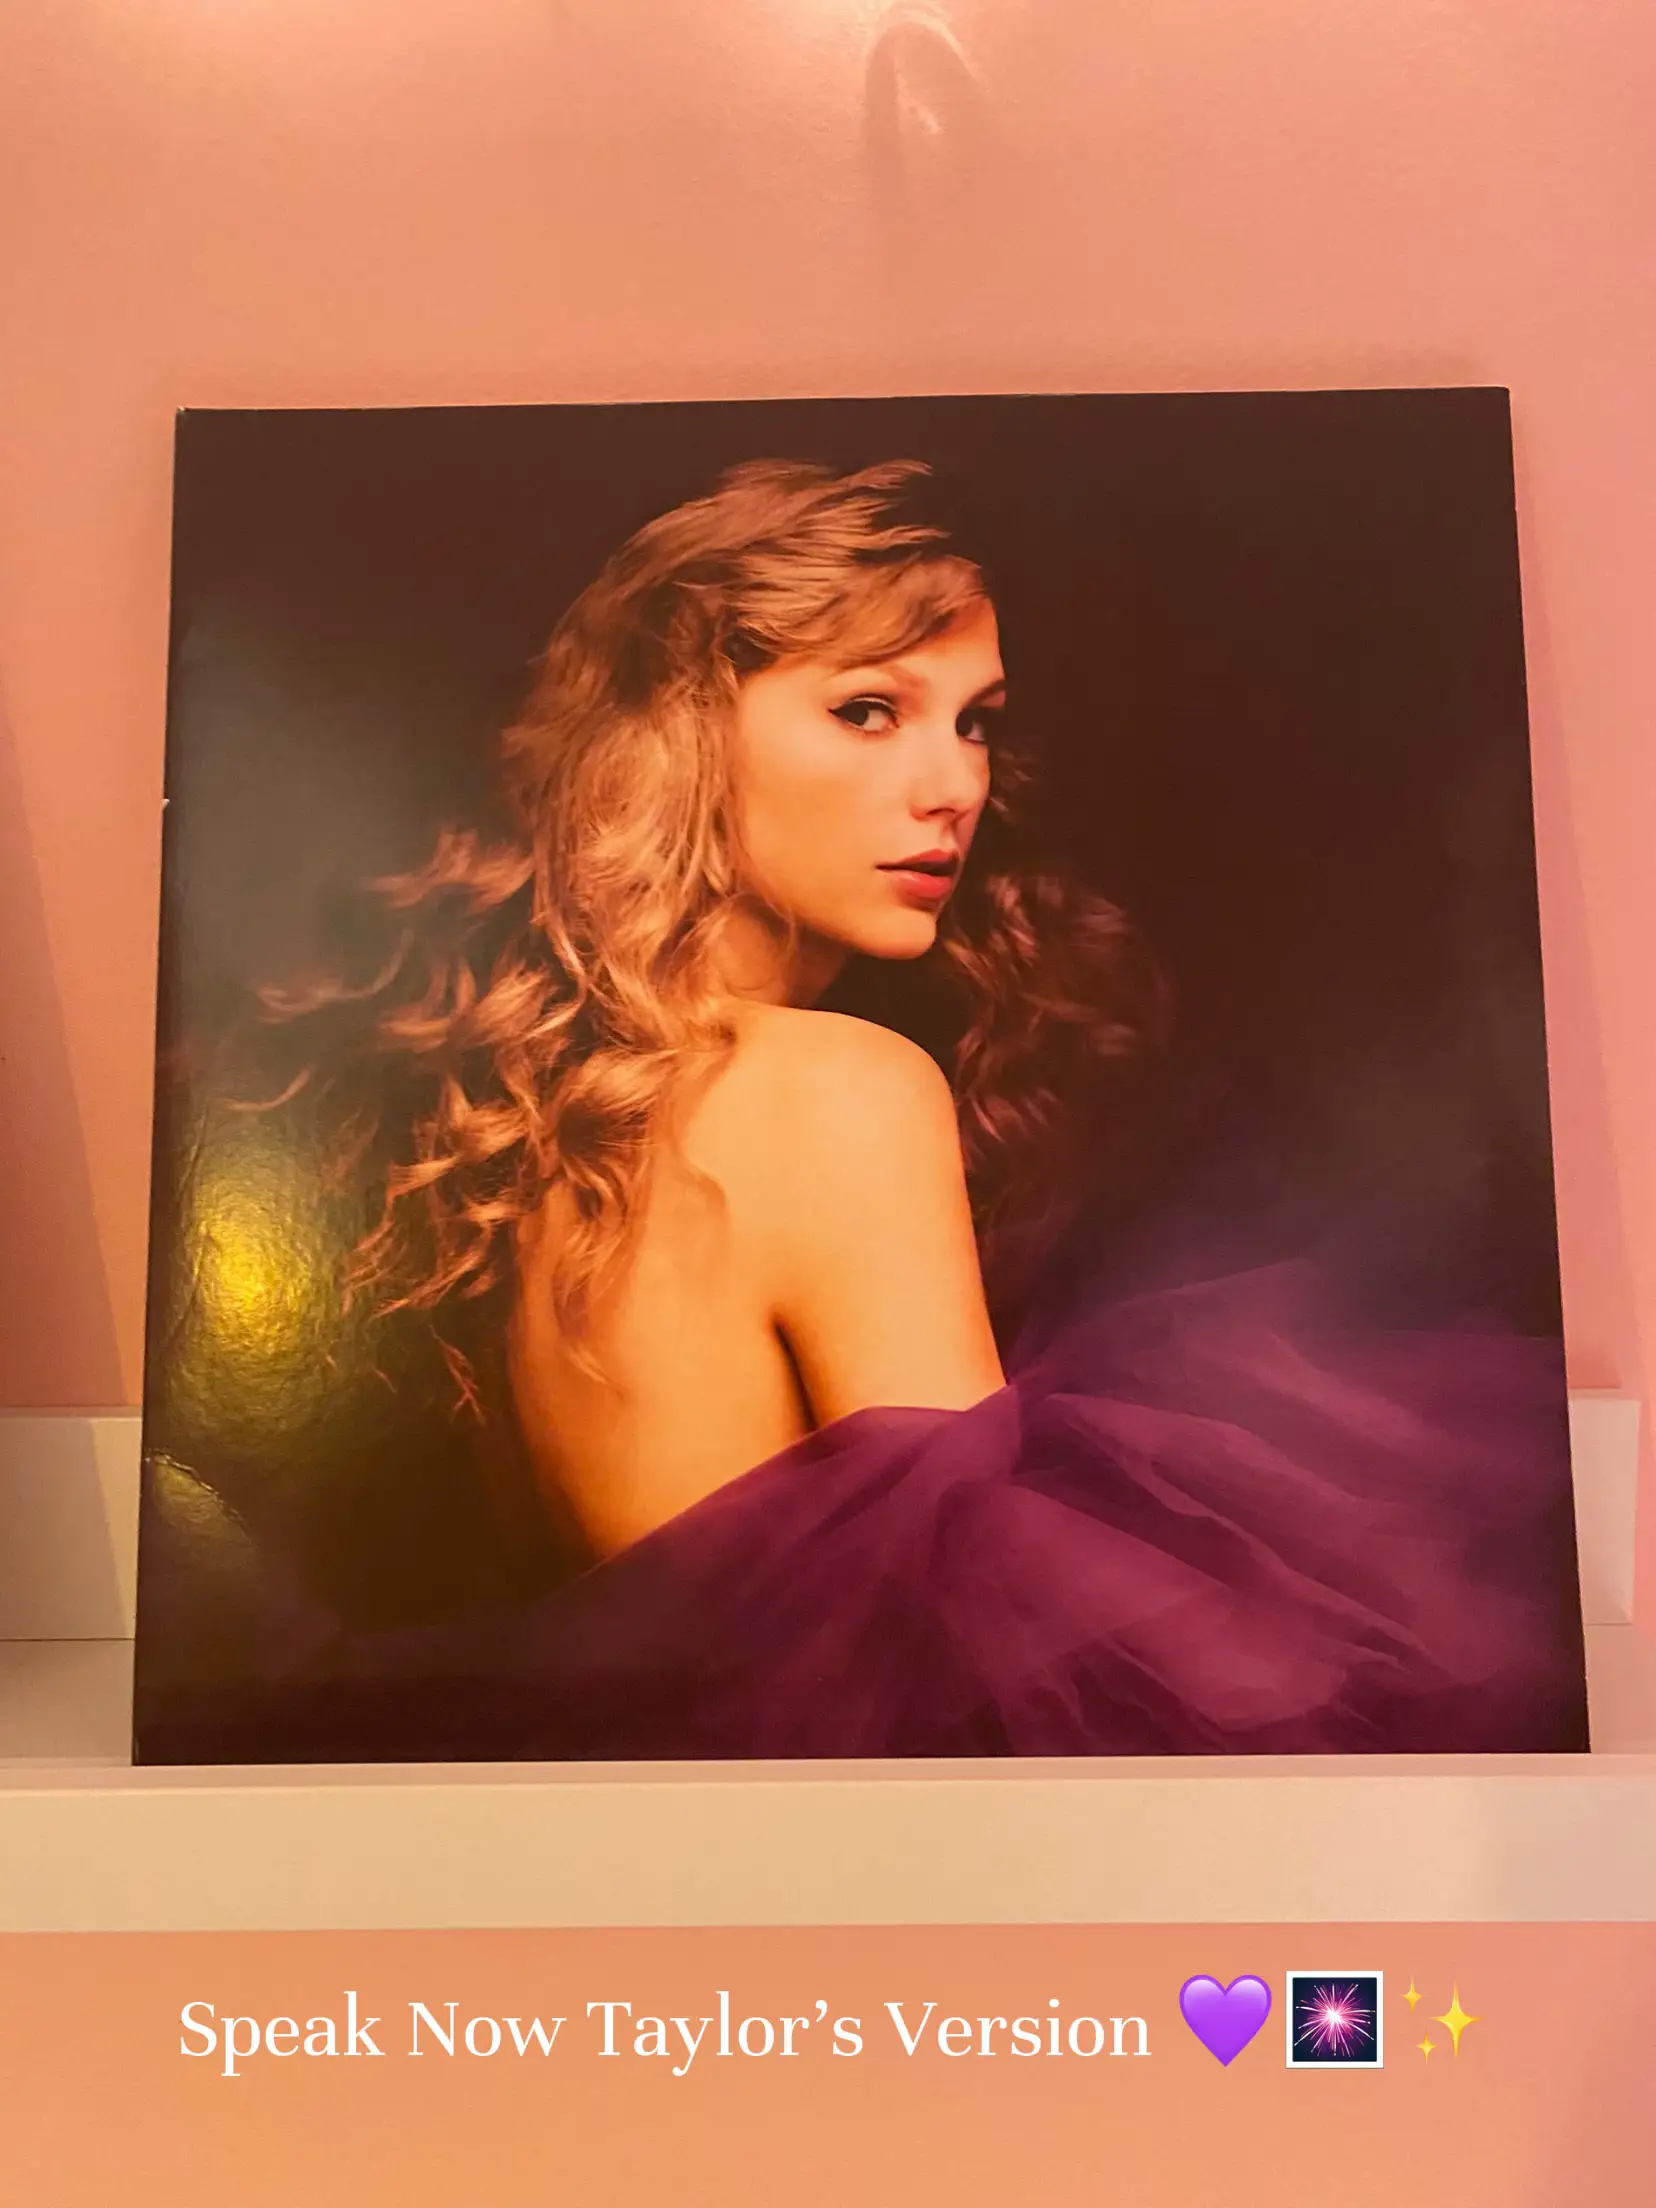 Some Folklore Slipmats I found today at my local record store for my  turntable! : r/TaylorSwiftMerch